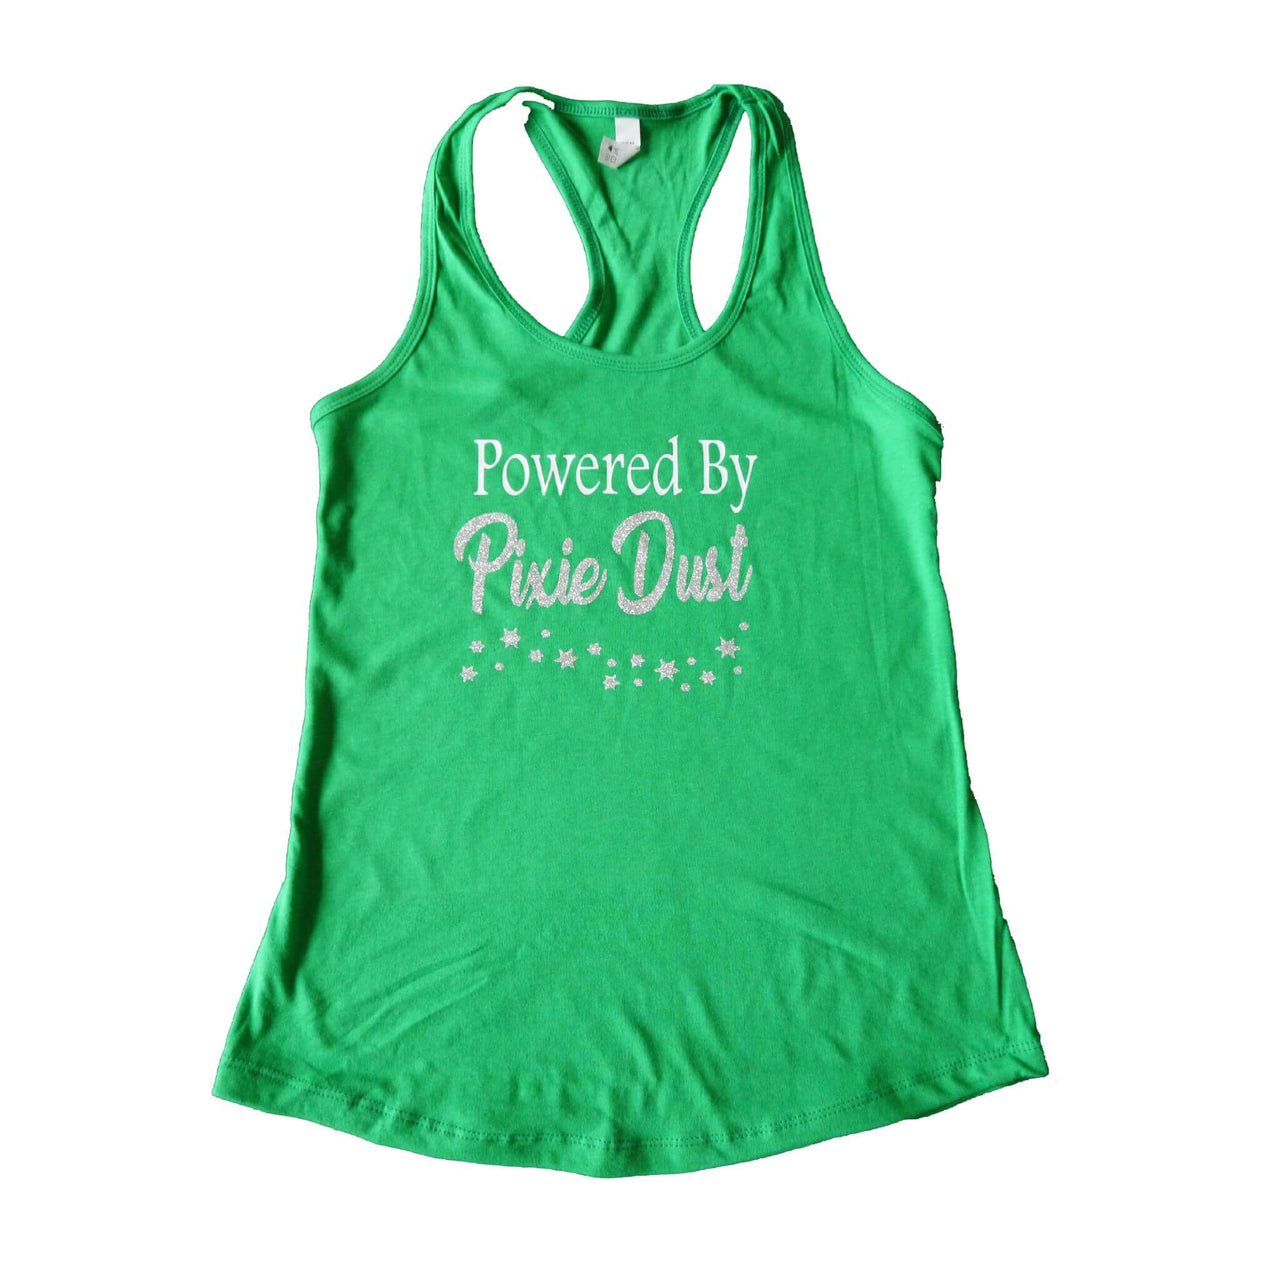 Powered by Pixie Dust Sparkle Tank